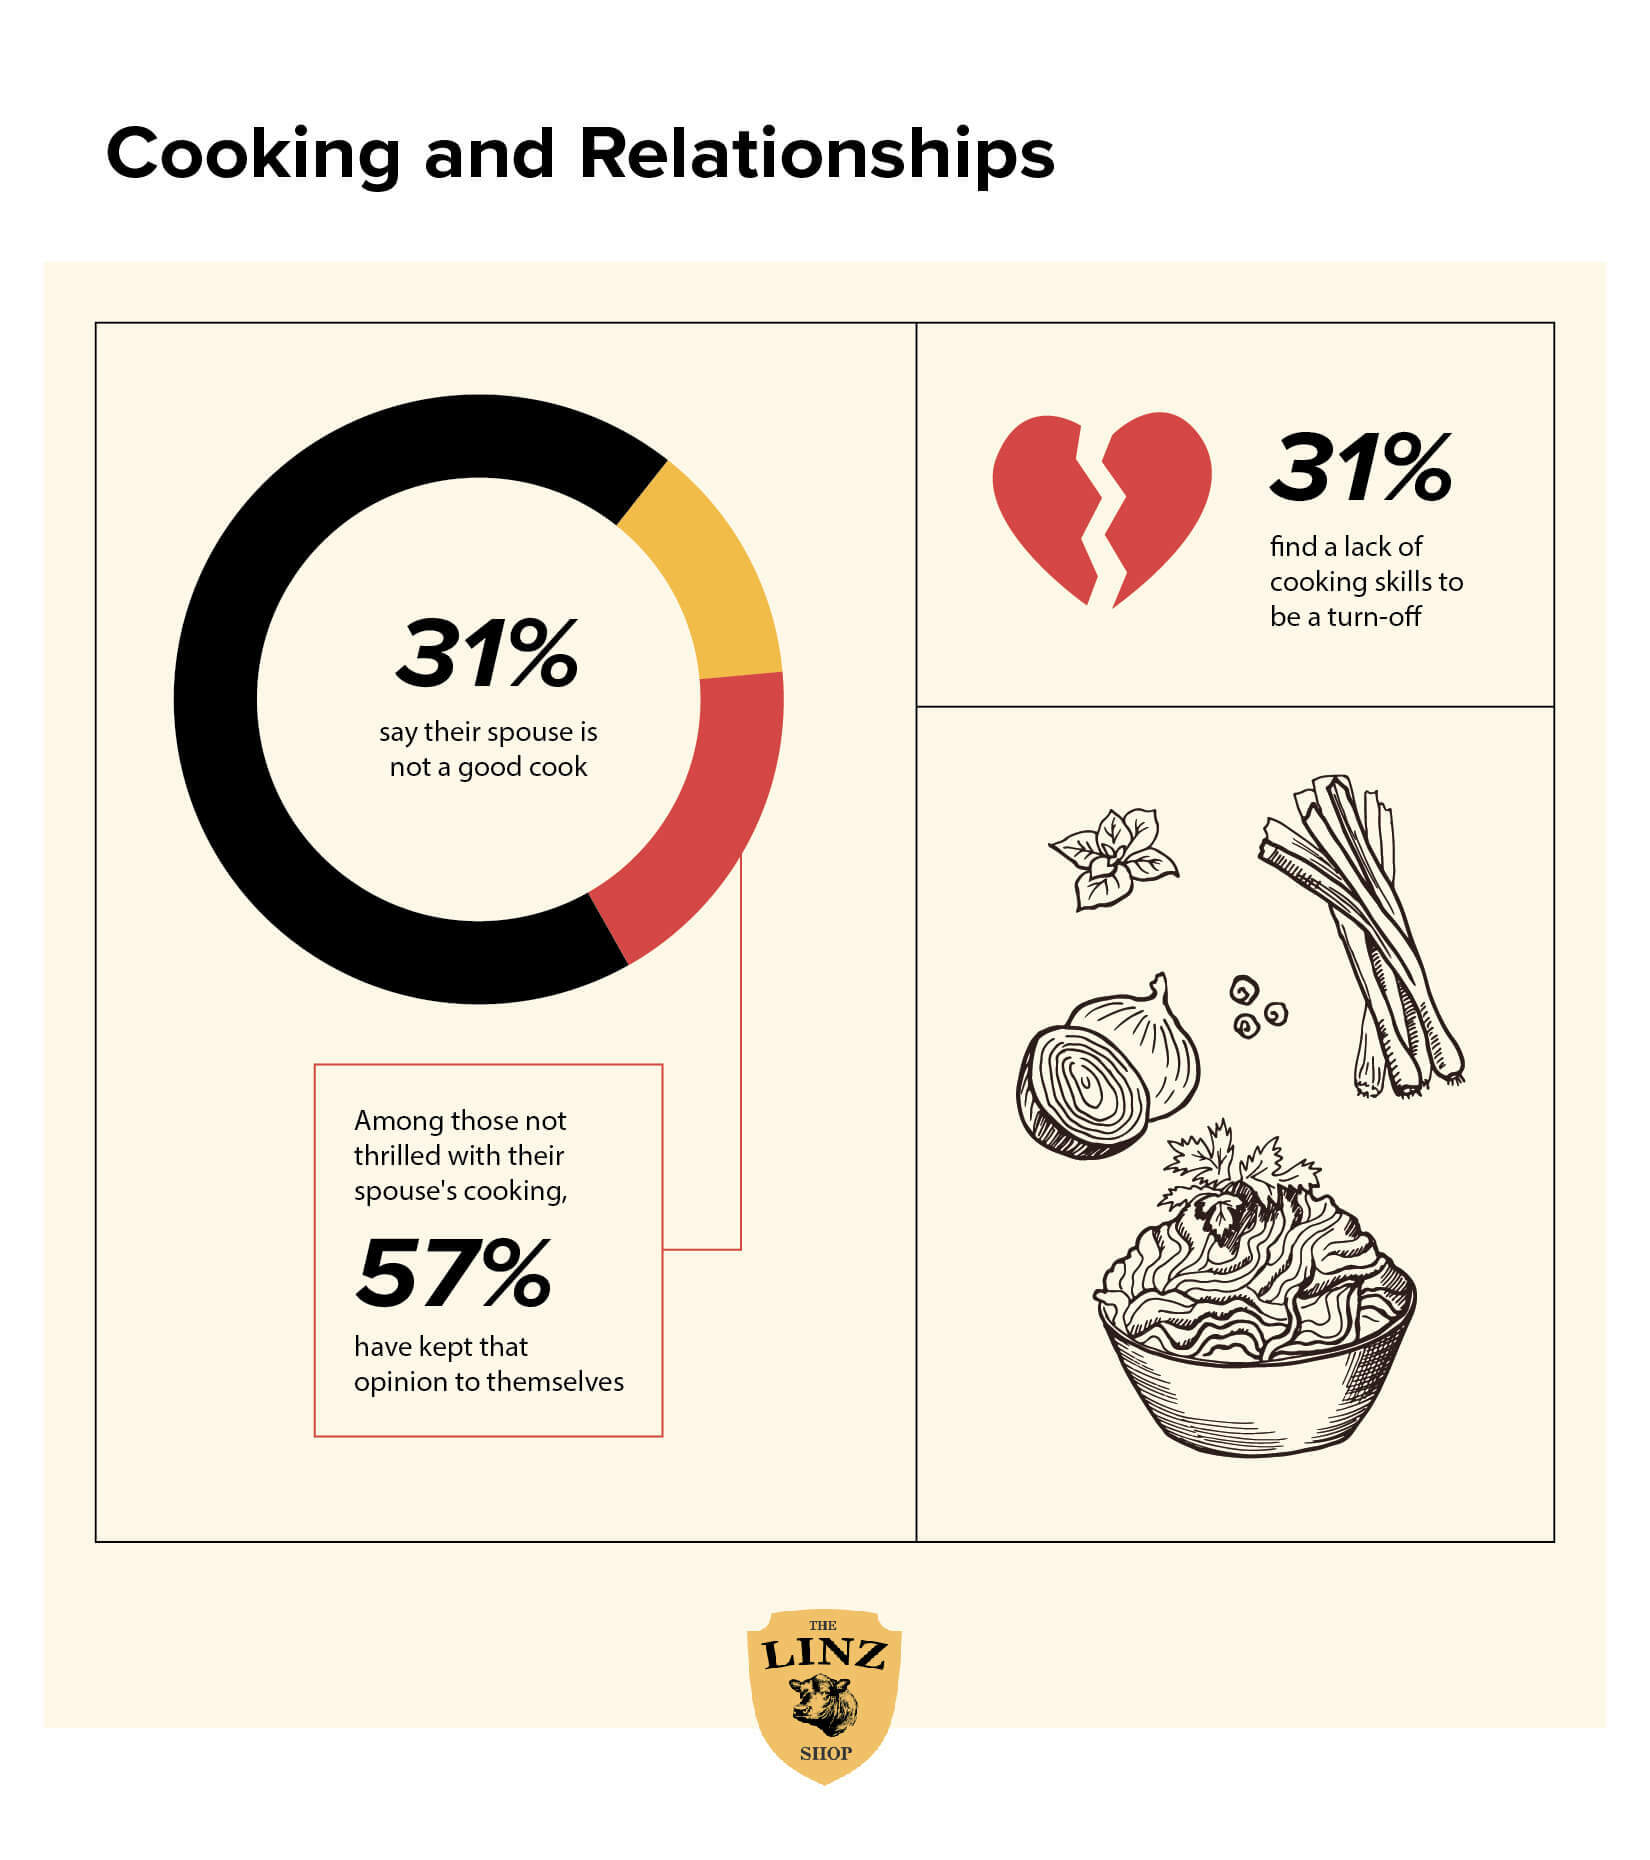 Cooking and relationships